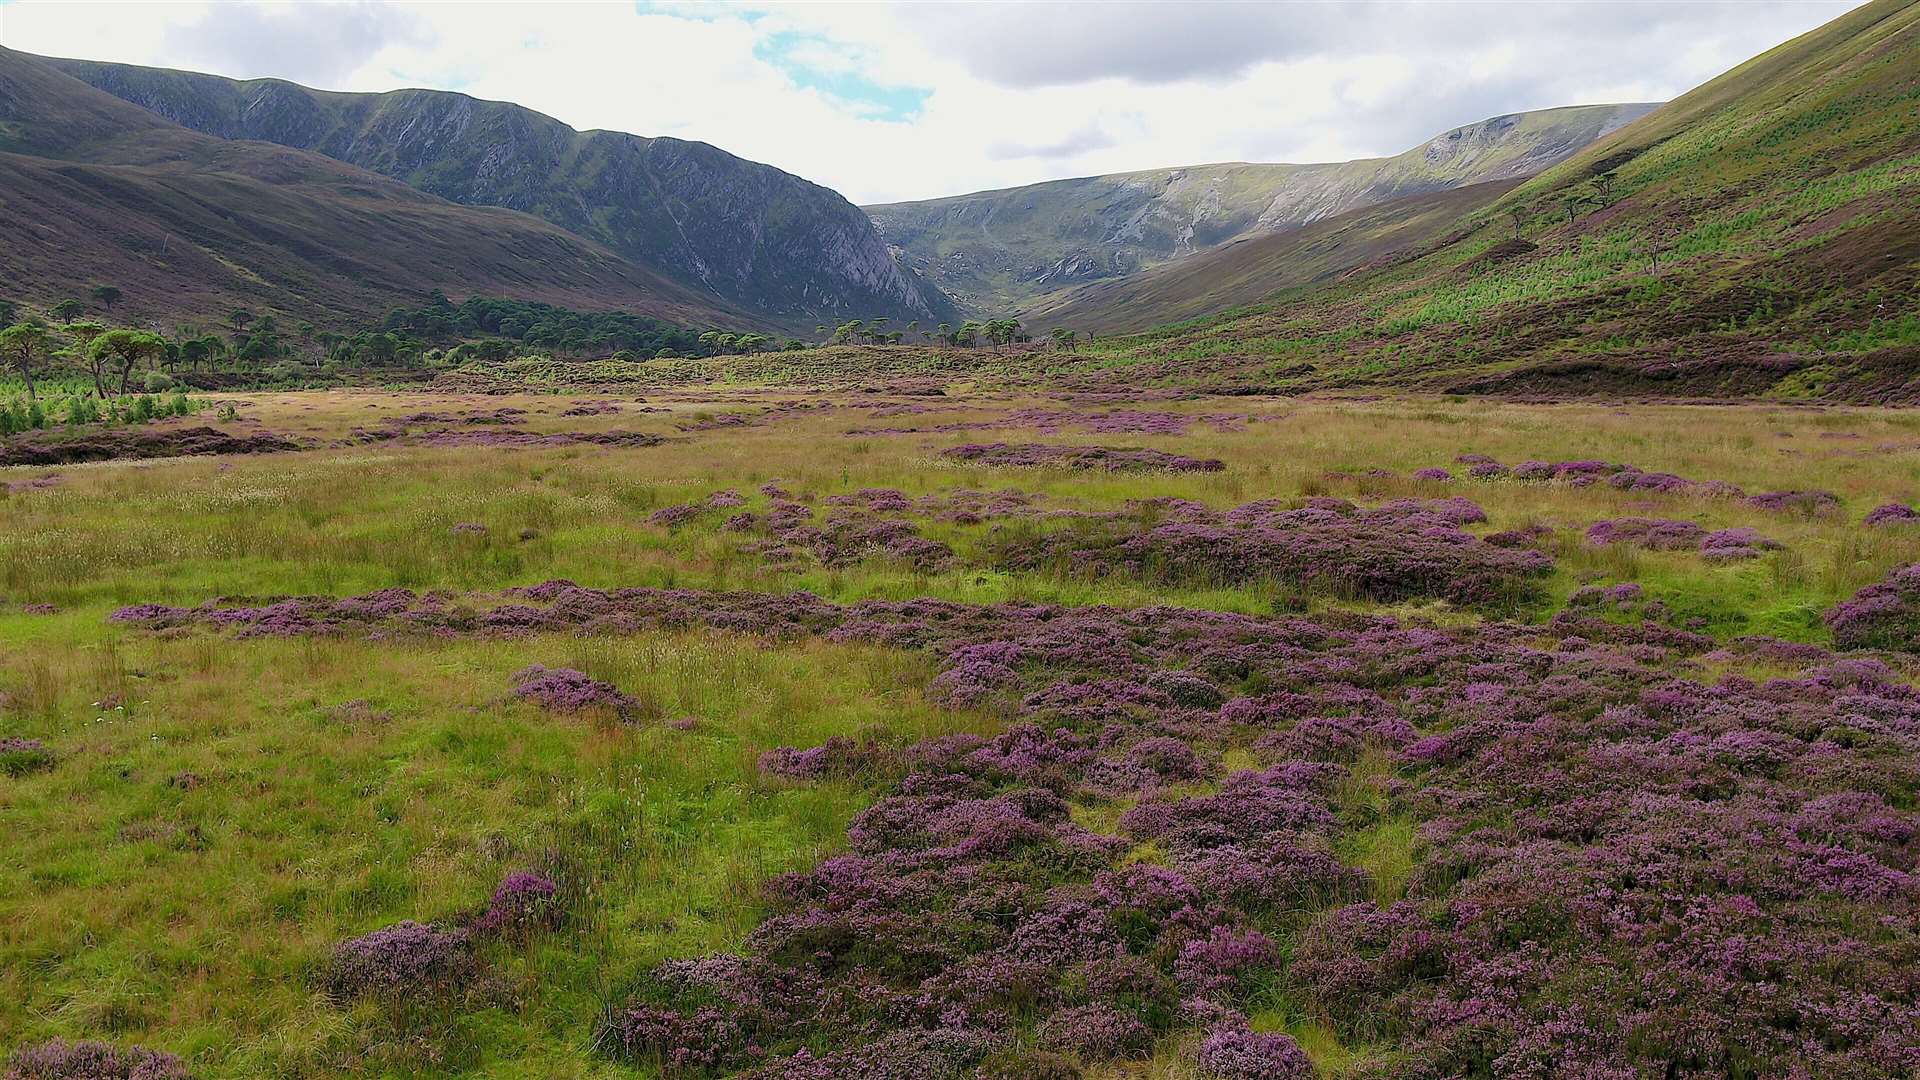 Historic climate change, together with forest clearance for agriculture, has led to a decline in woodland in Scotland. Photo: Norman Strachan